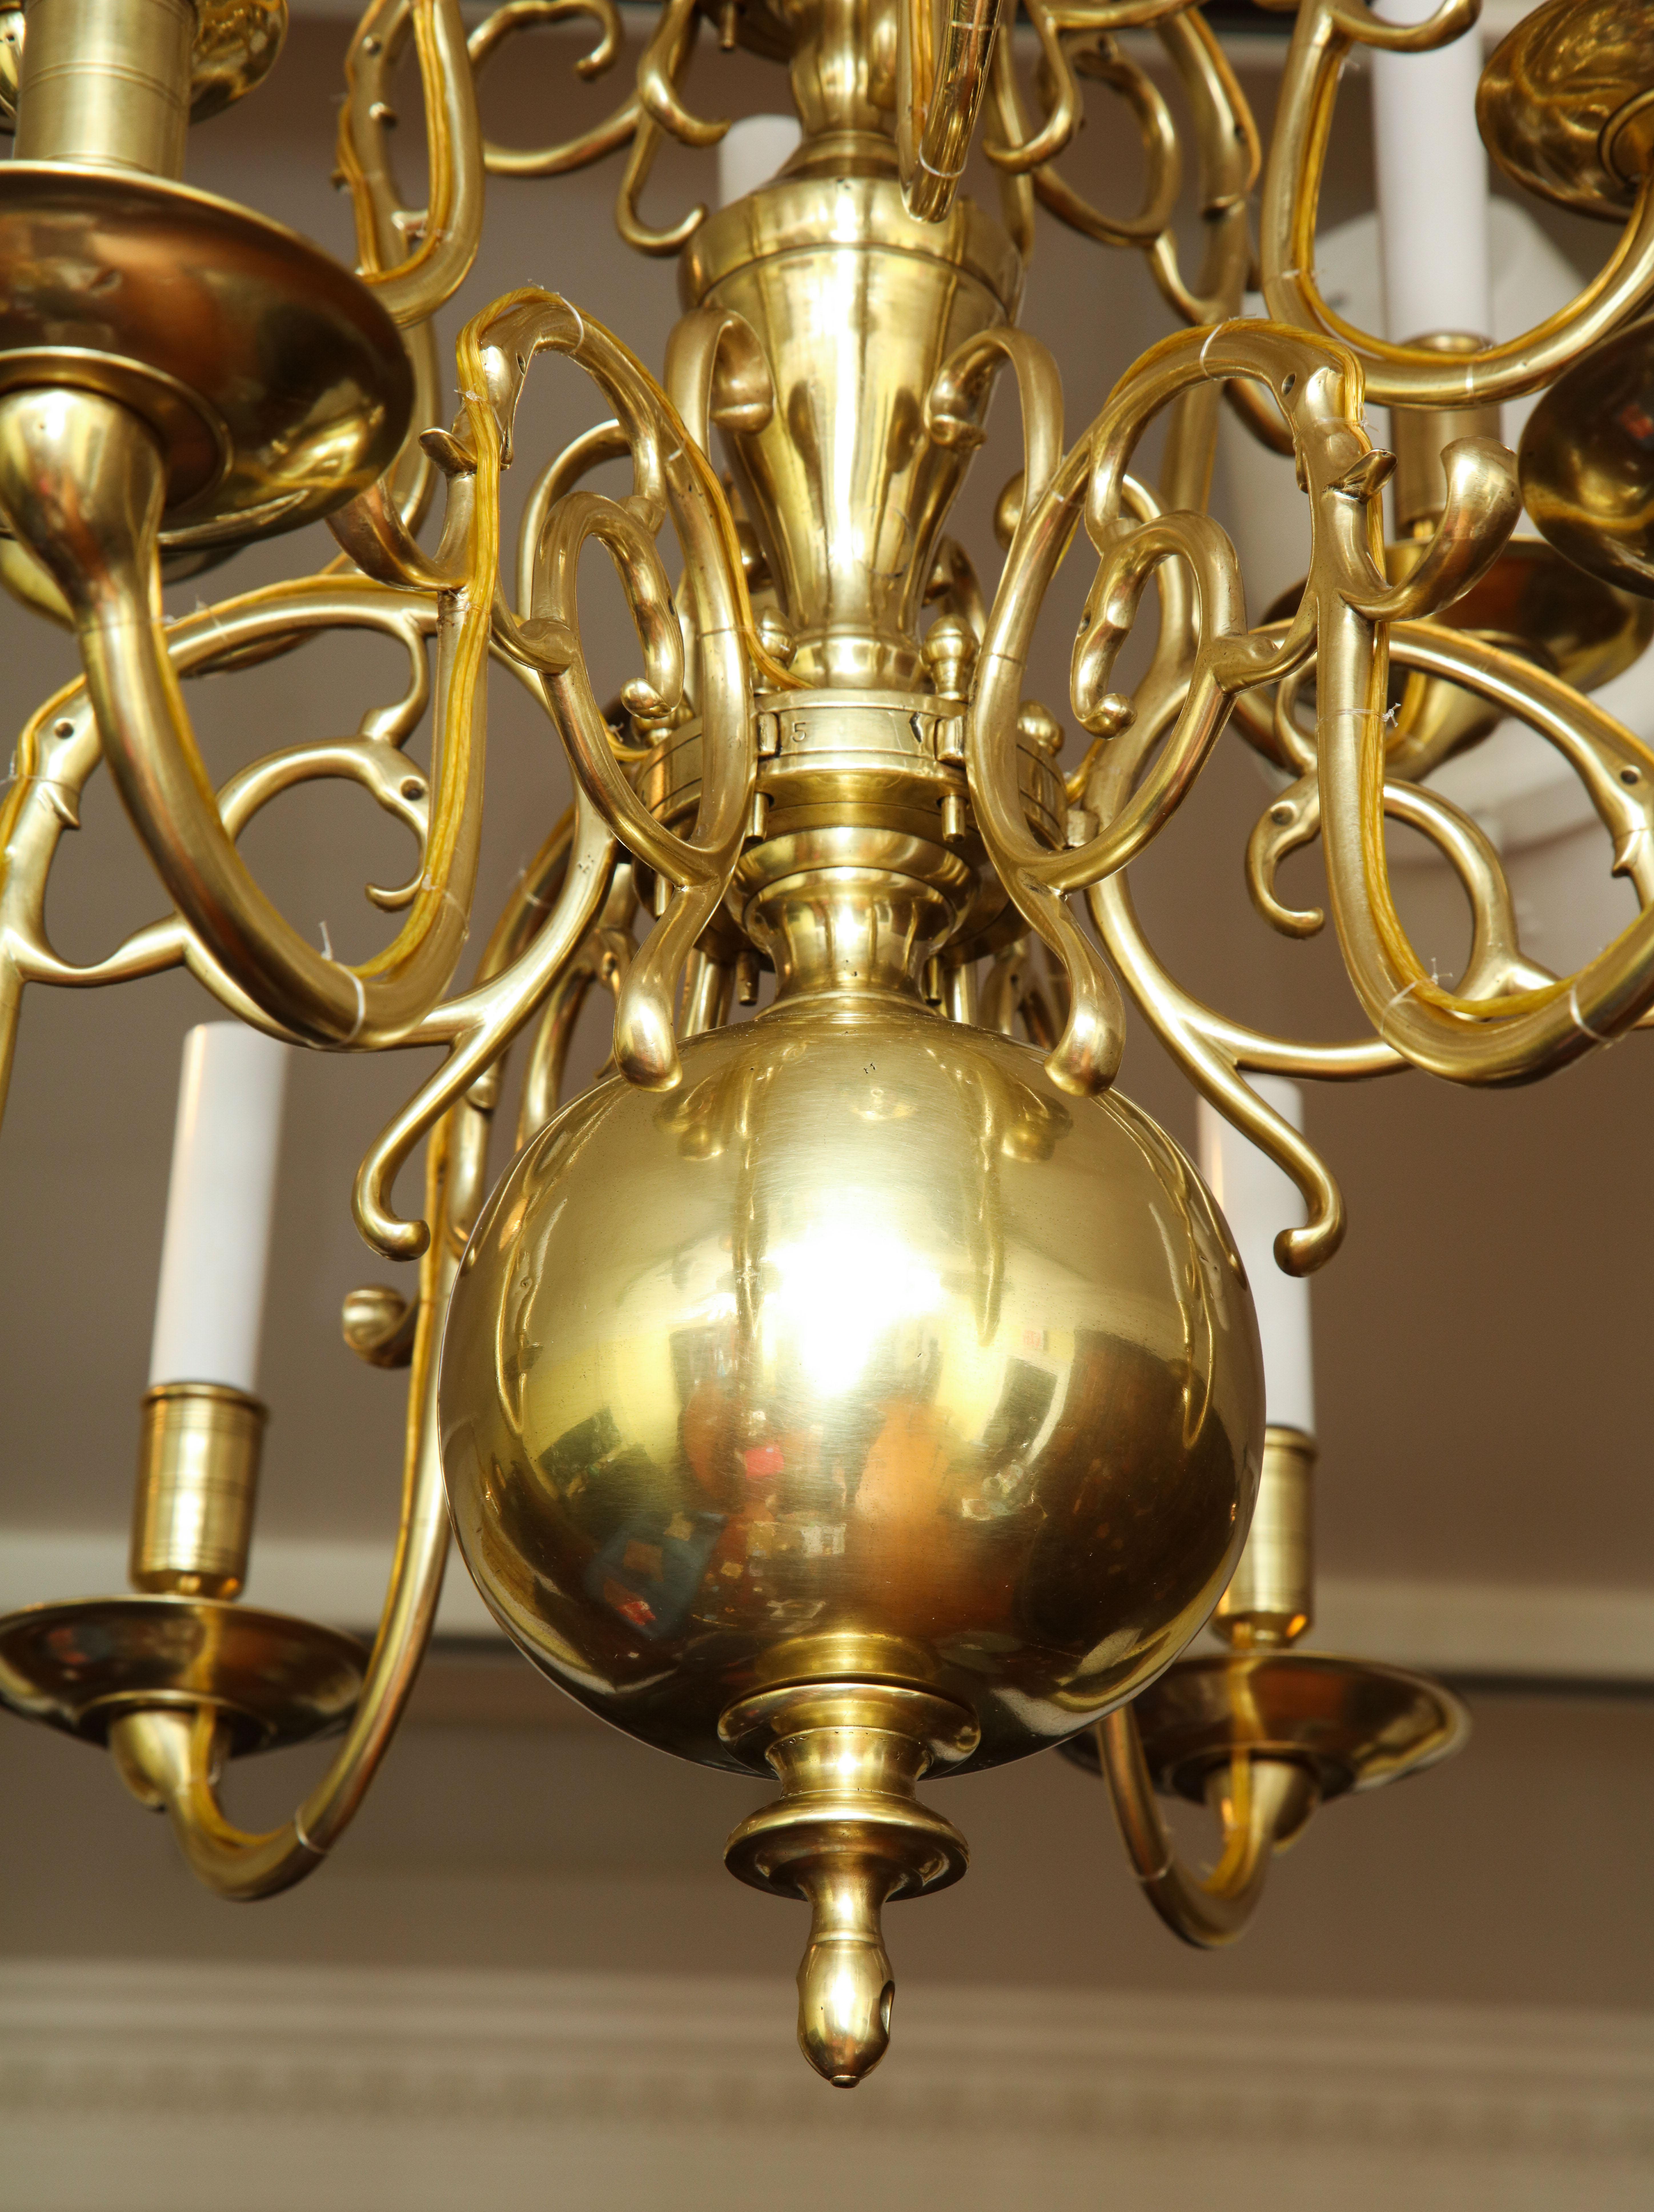 Queen Anne Antique Brass 12-Light Scrolled Arm Chandelier with Large Lower Ball, circa 1850 For Sale